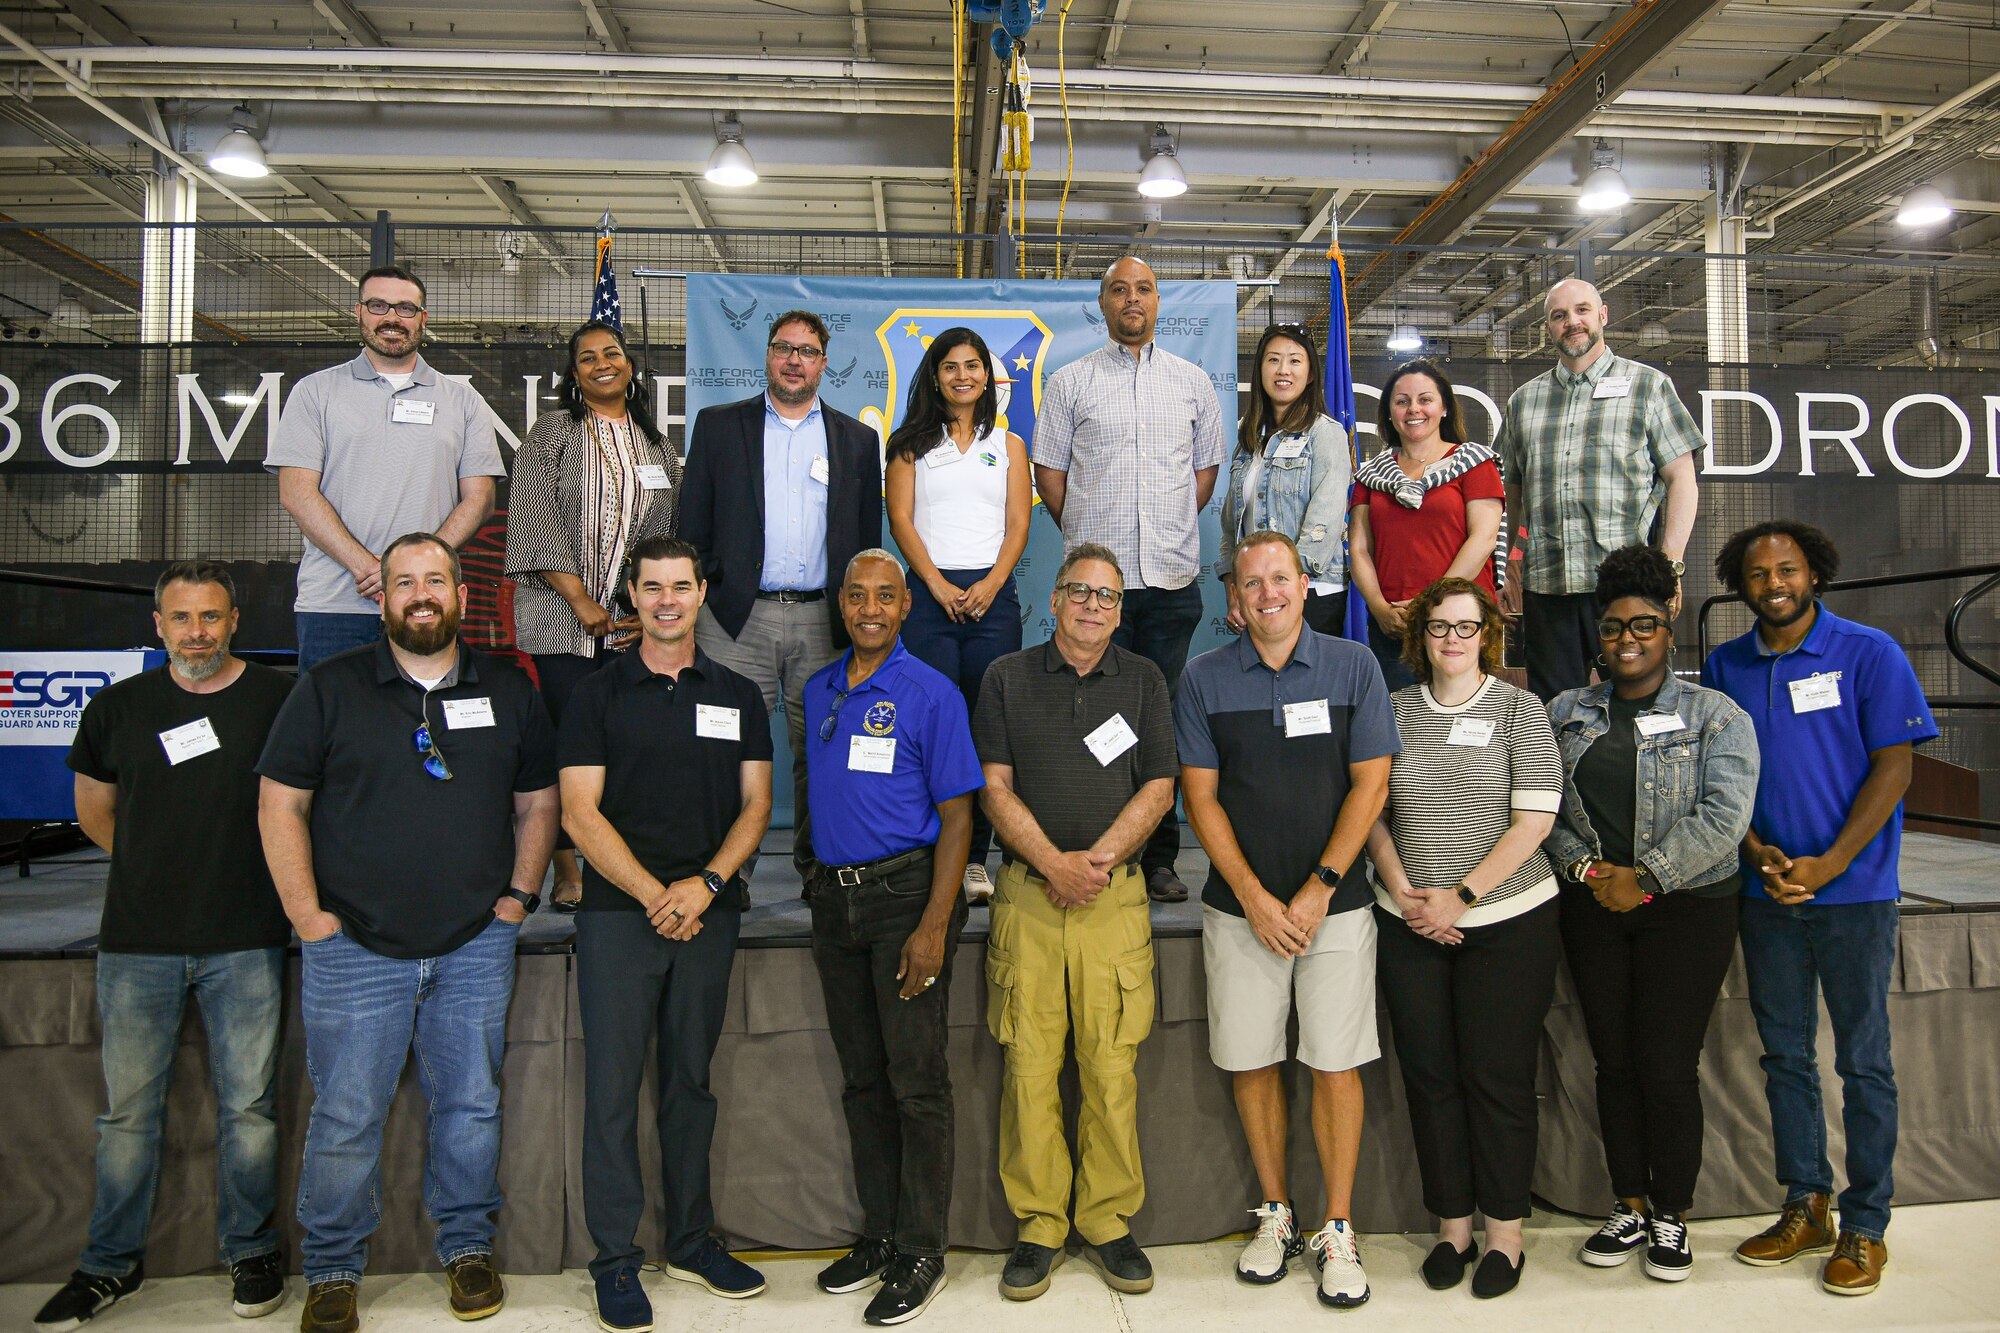 Civilian employees pose for a photo during Employer Day on Dover Air Force Base, Delaware, June 3, 2023. The employees were treated to a luncheon, where they were recognized with certificates of appreciation for supporting their Reserve employees. (U.S. Air Force photo by Senior Airman Shayna Hodge)